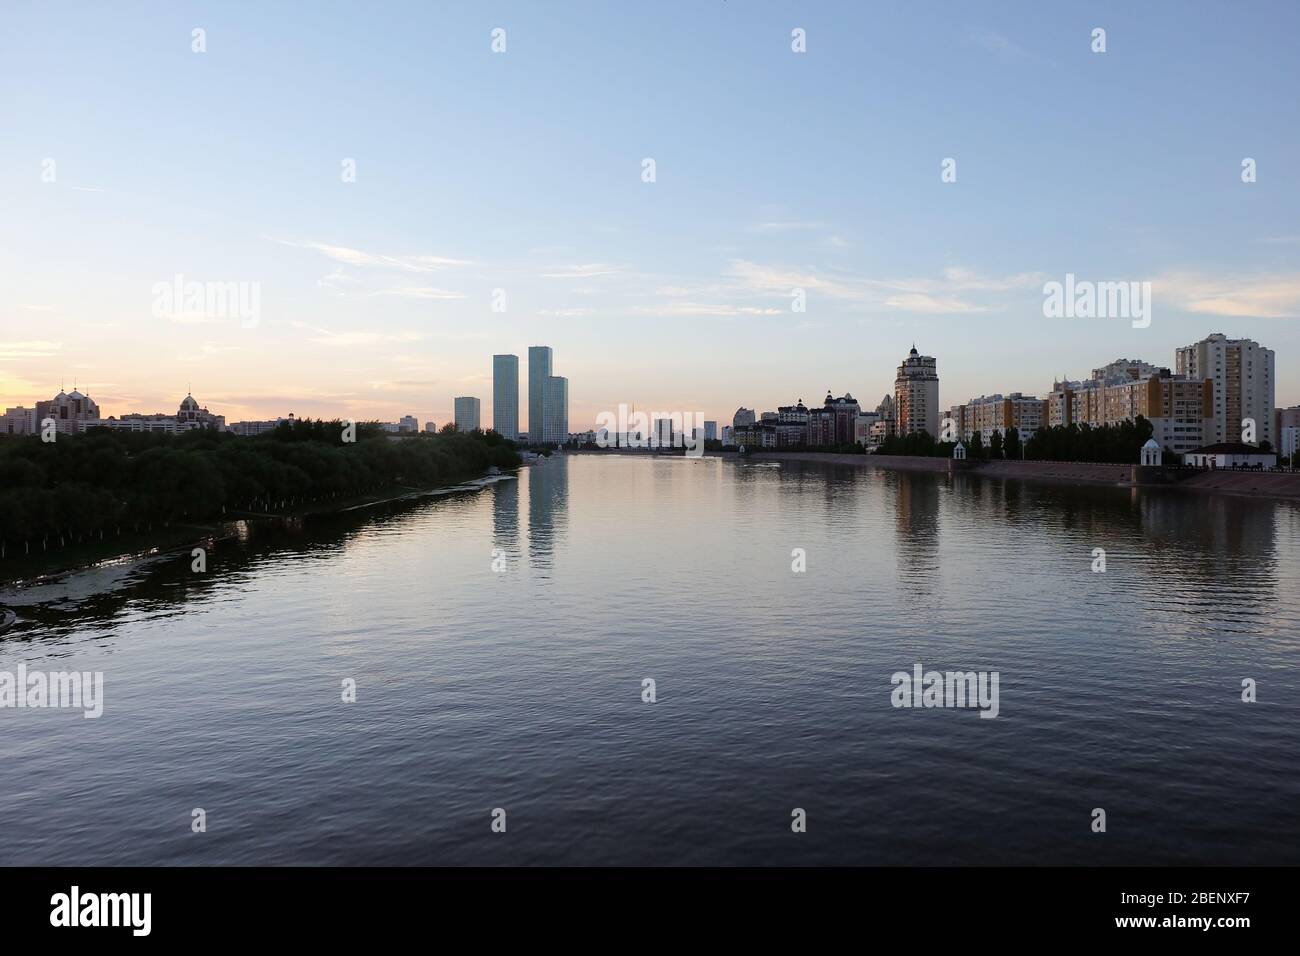 NUR-SULTAN, ASTANA, KAZAKHSTAN - JUNE 3, 2015: A beautifula panorama of Ishim river with smooth surface of water and evening city view Stock Photo